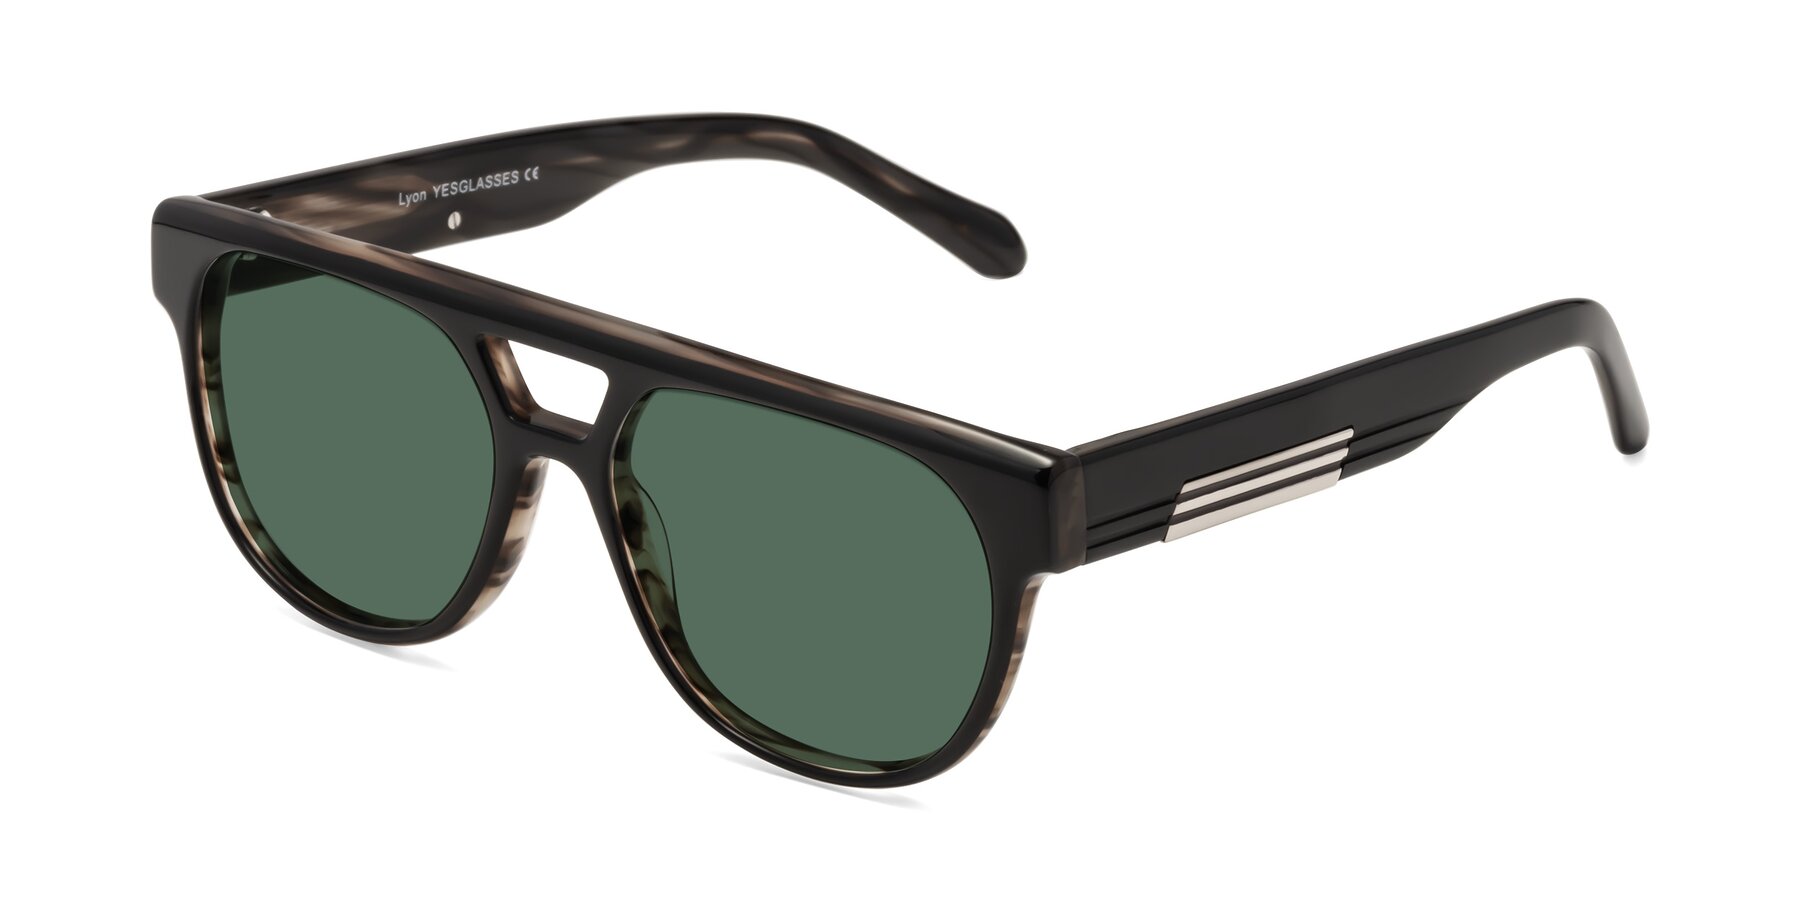 Angle of Lyon in Black-Brown with Green Polarized Lenses